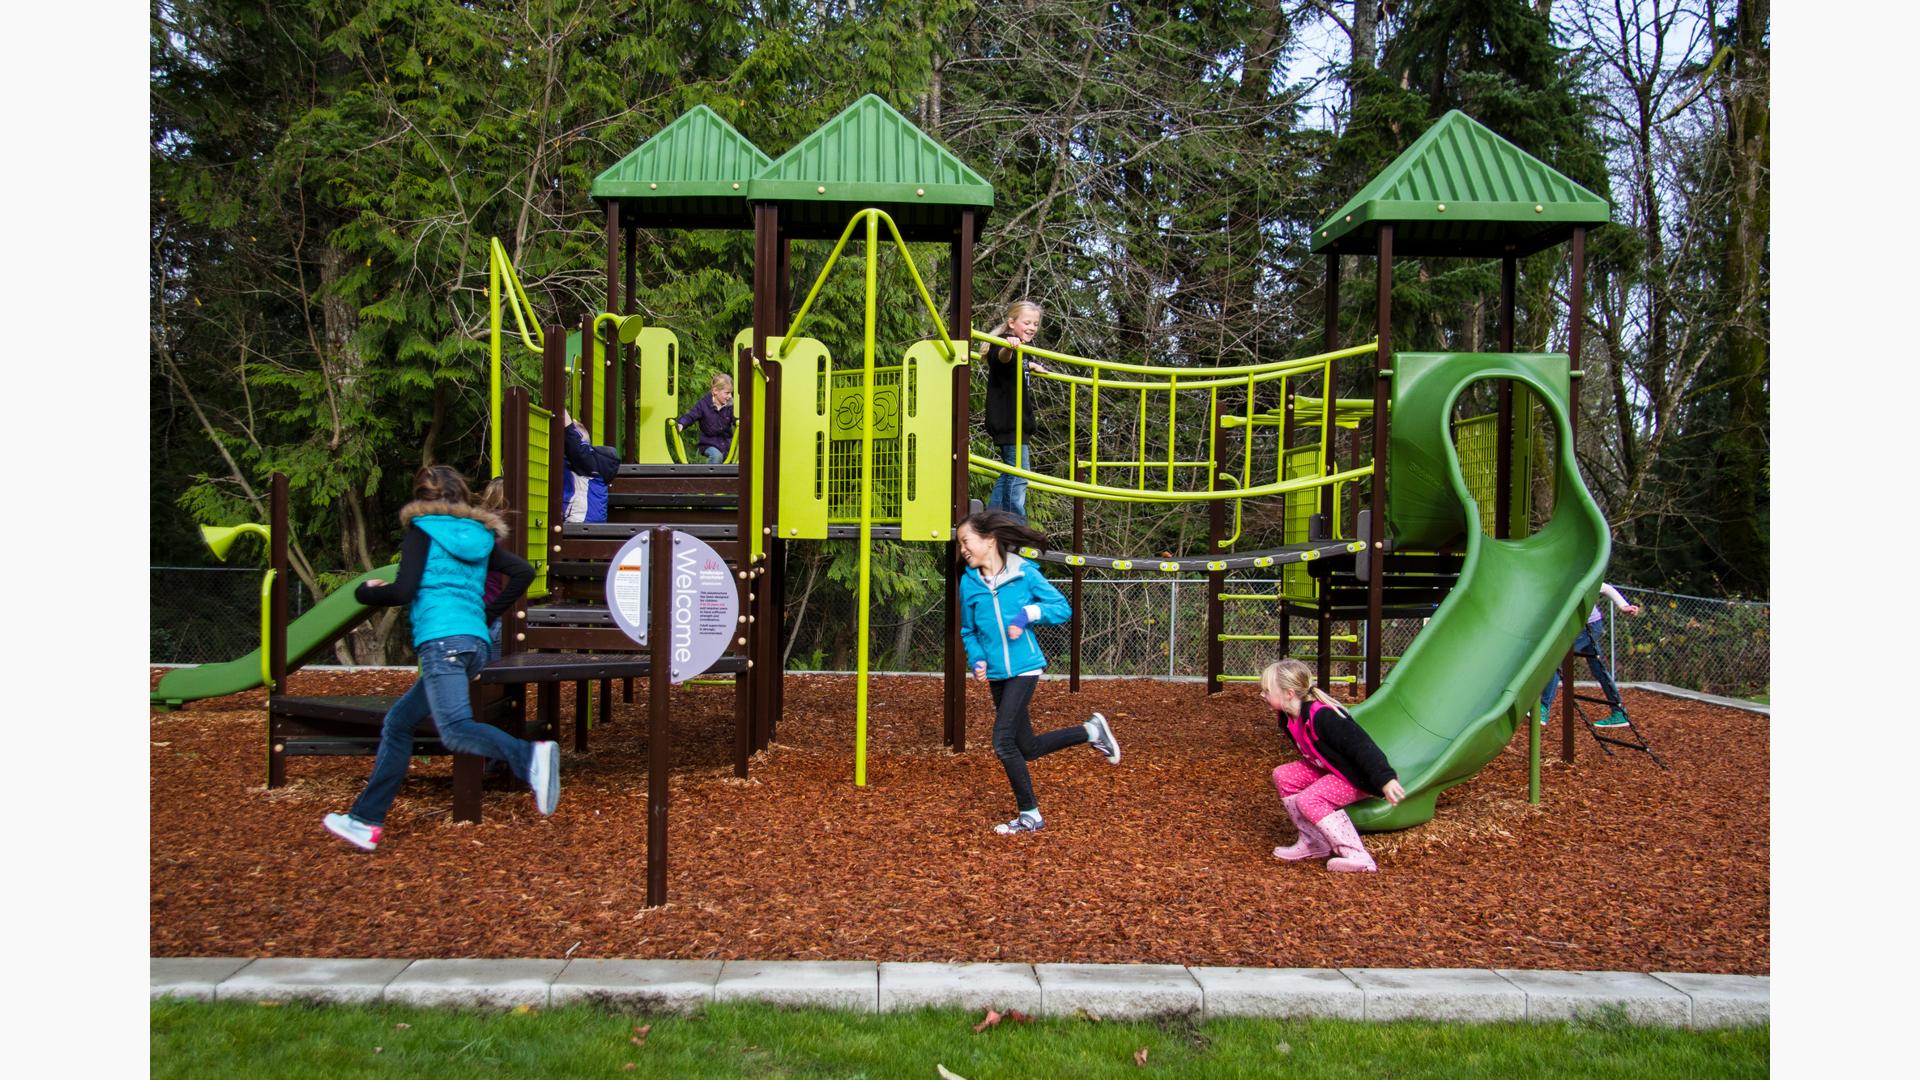 Kids playing on nature inspired playground with green roofs and play equipment. Brown stairs with linking bridge. Tall evergreen trees surround the playground while three girls play chase across the wood chips around the playground.